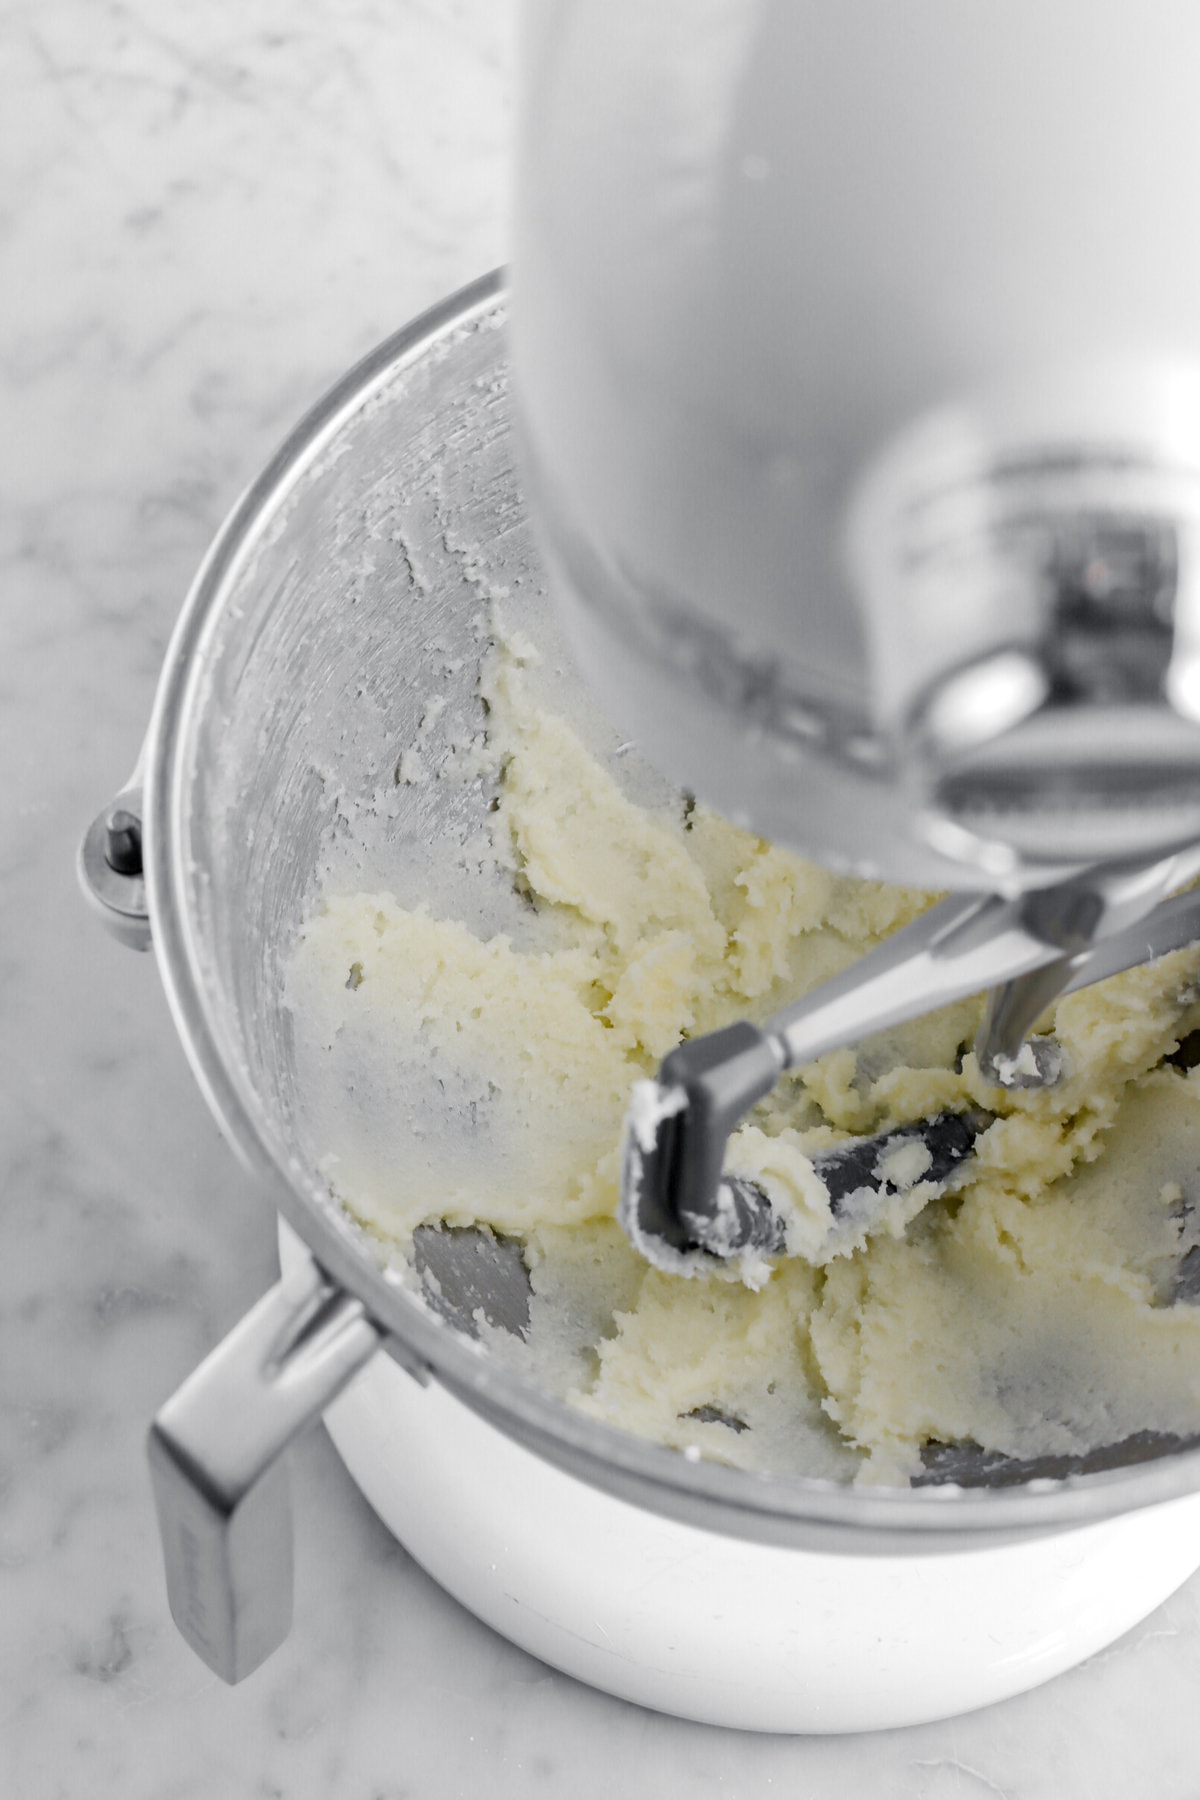 beaten butter and sugar in stand mixer.